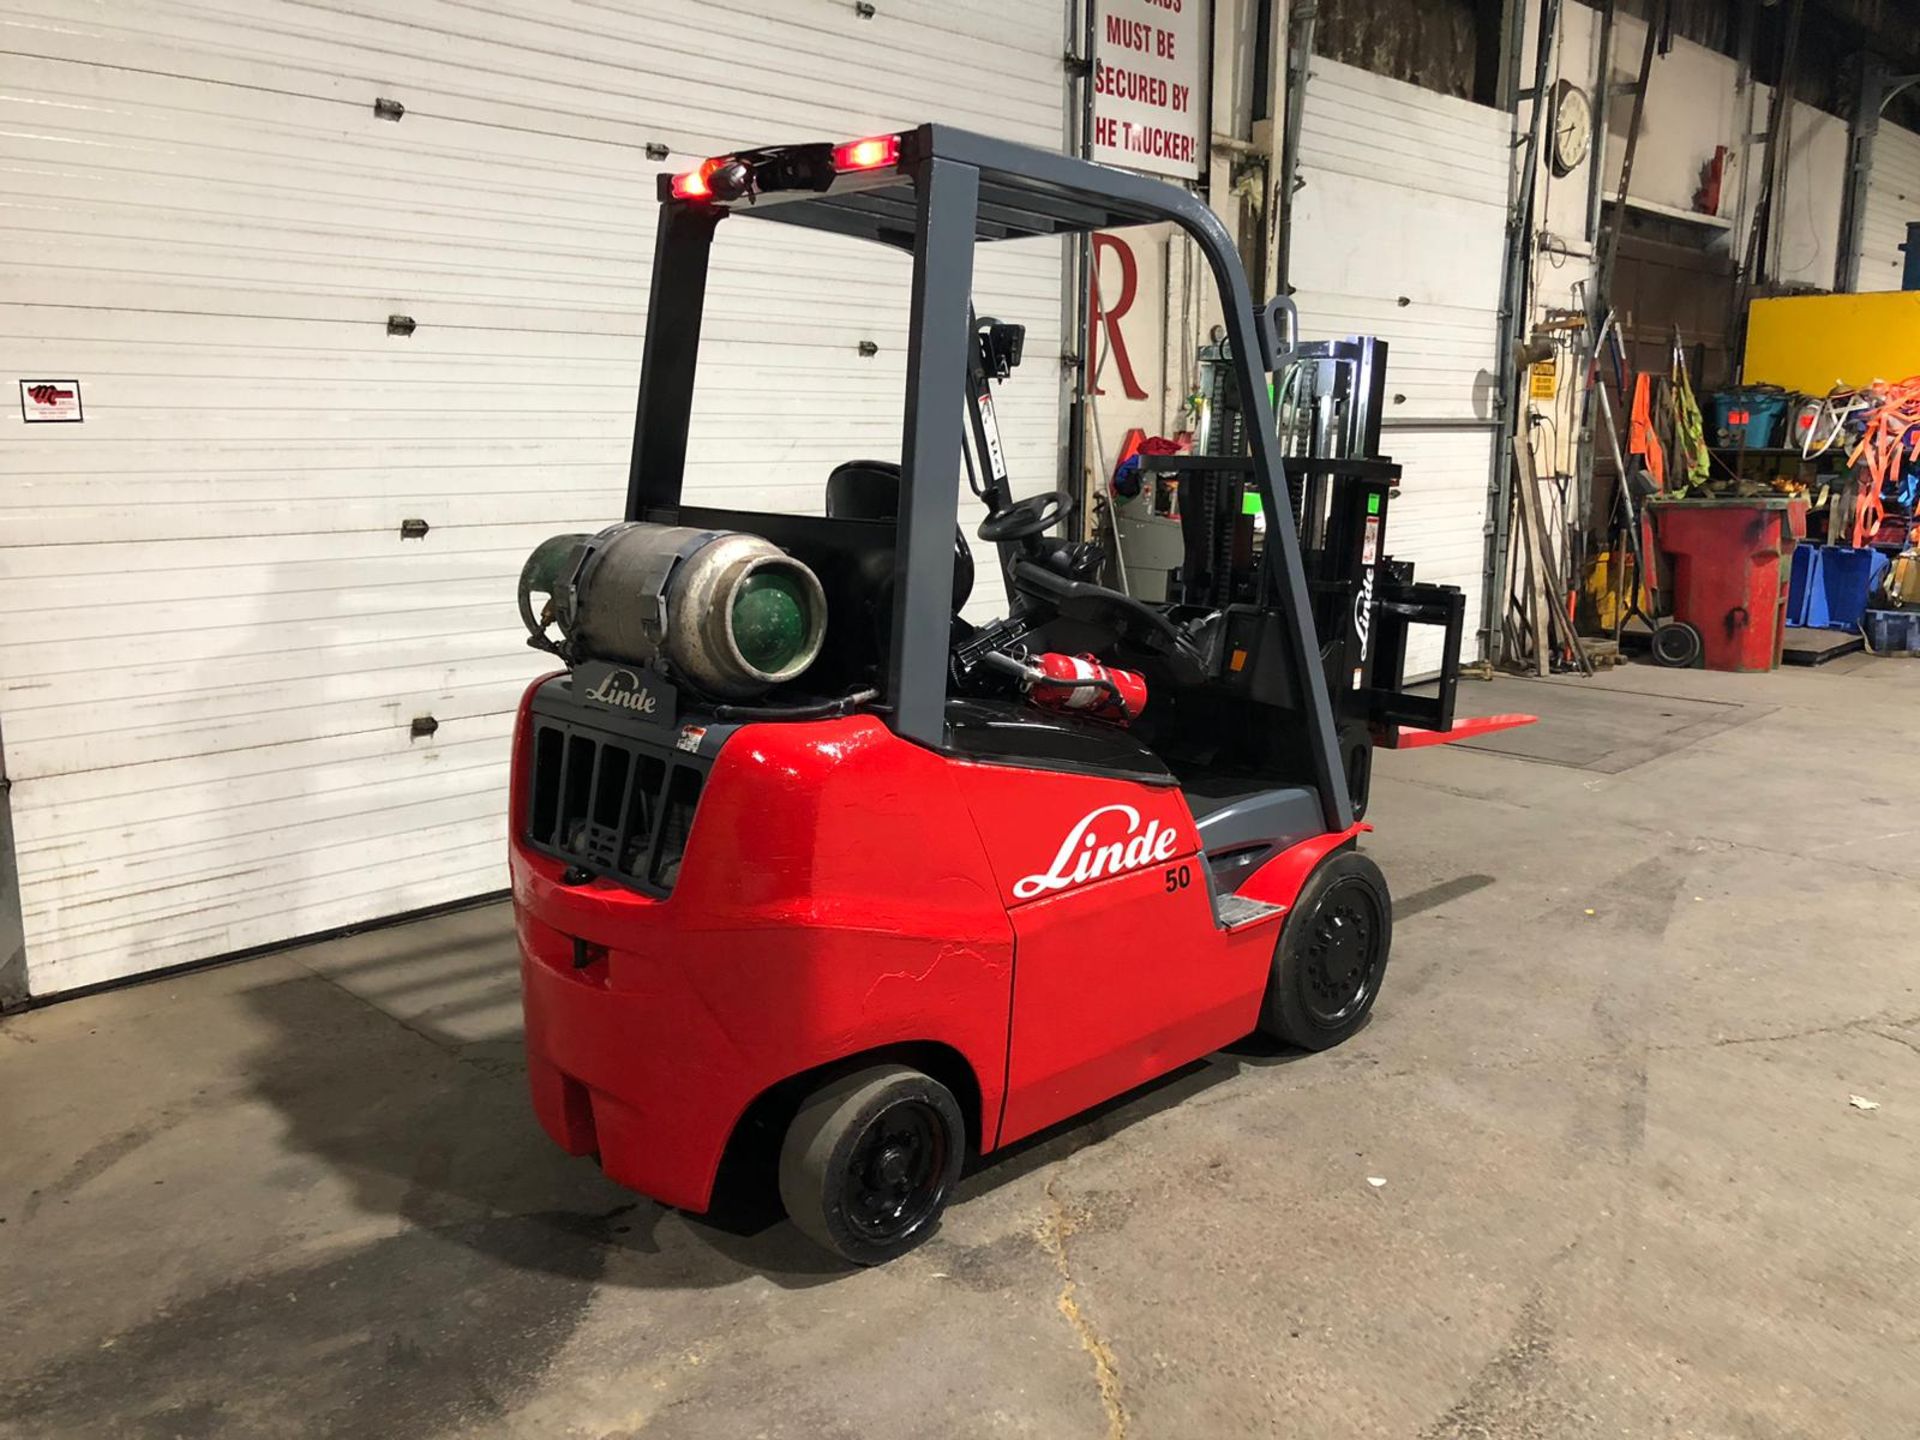 2013 Linde 5000lbs Capacity LPG (Propane) INDOOR Forklift with sideshift (no propane tank included) - Image 2 of 5